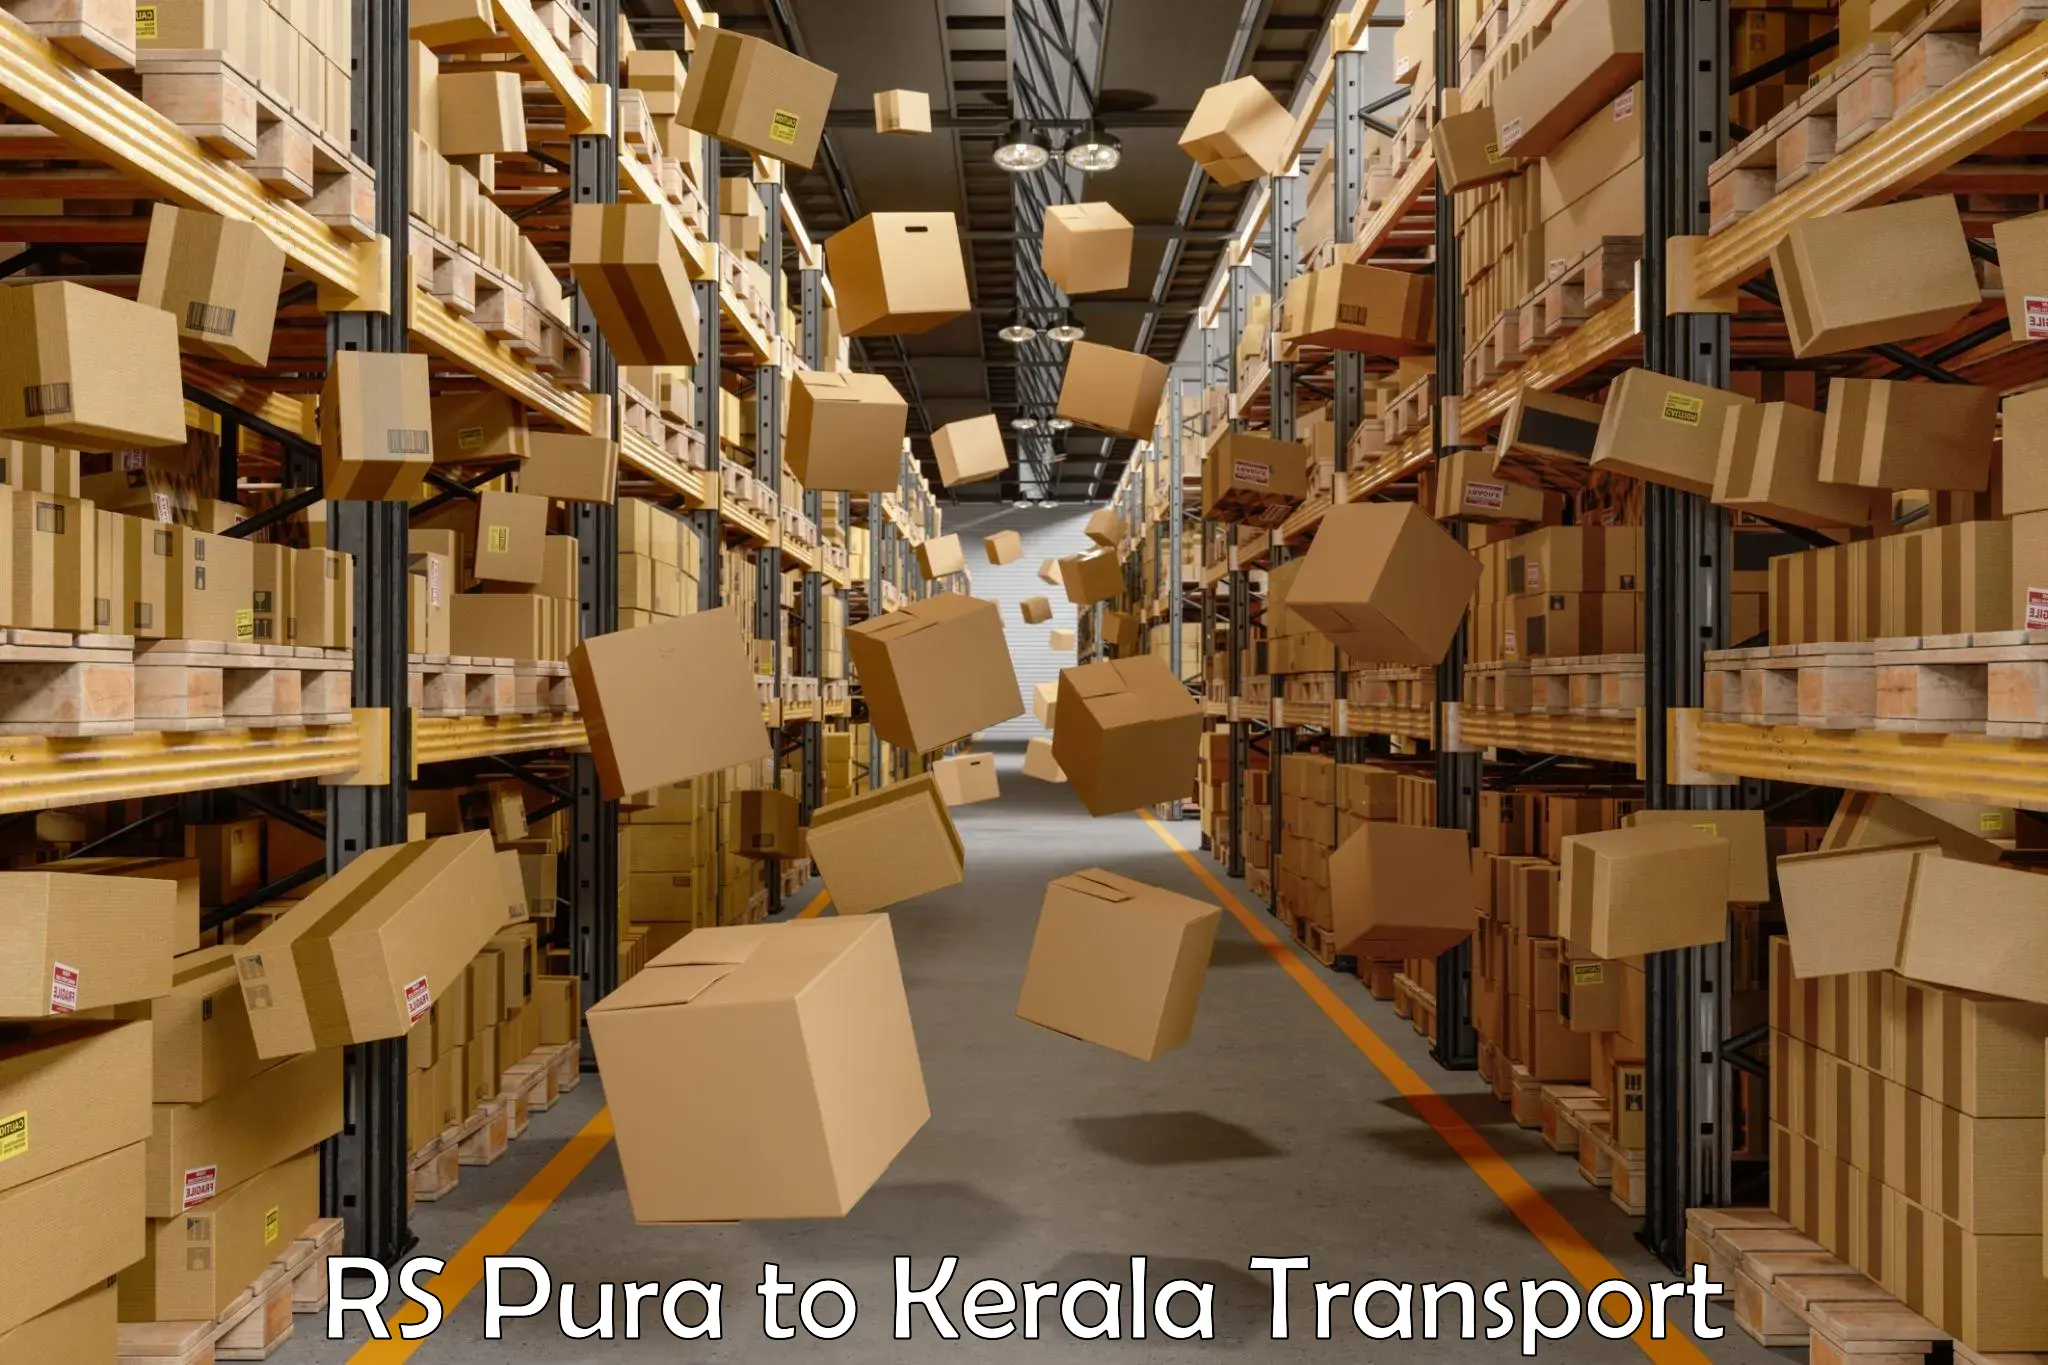 Express transport services RS Pura to IIIT Kottayam